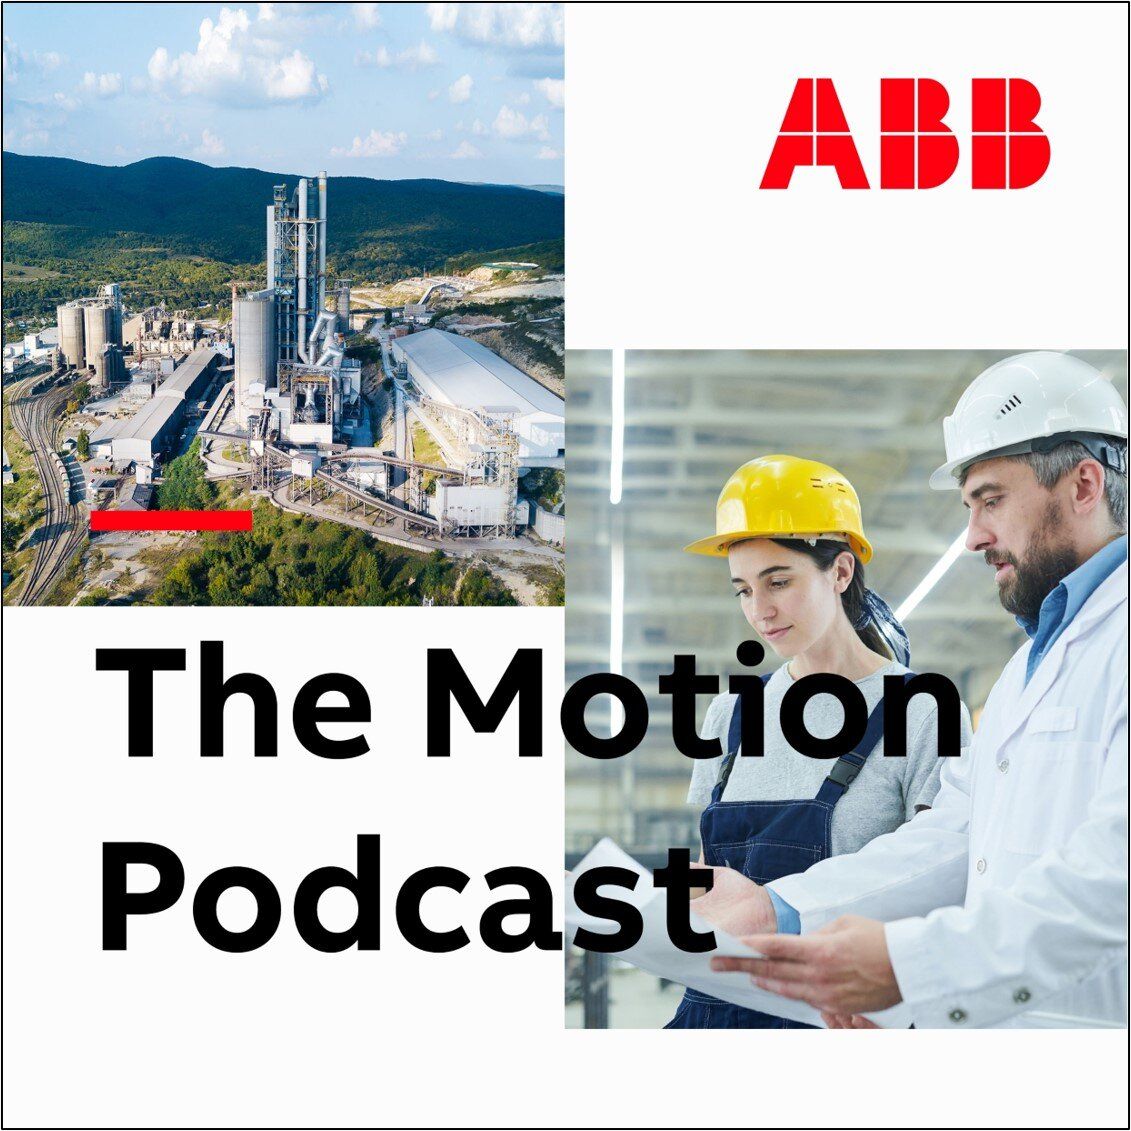 The Motion Podcast